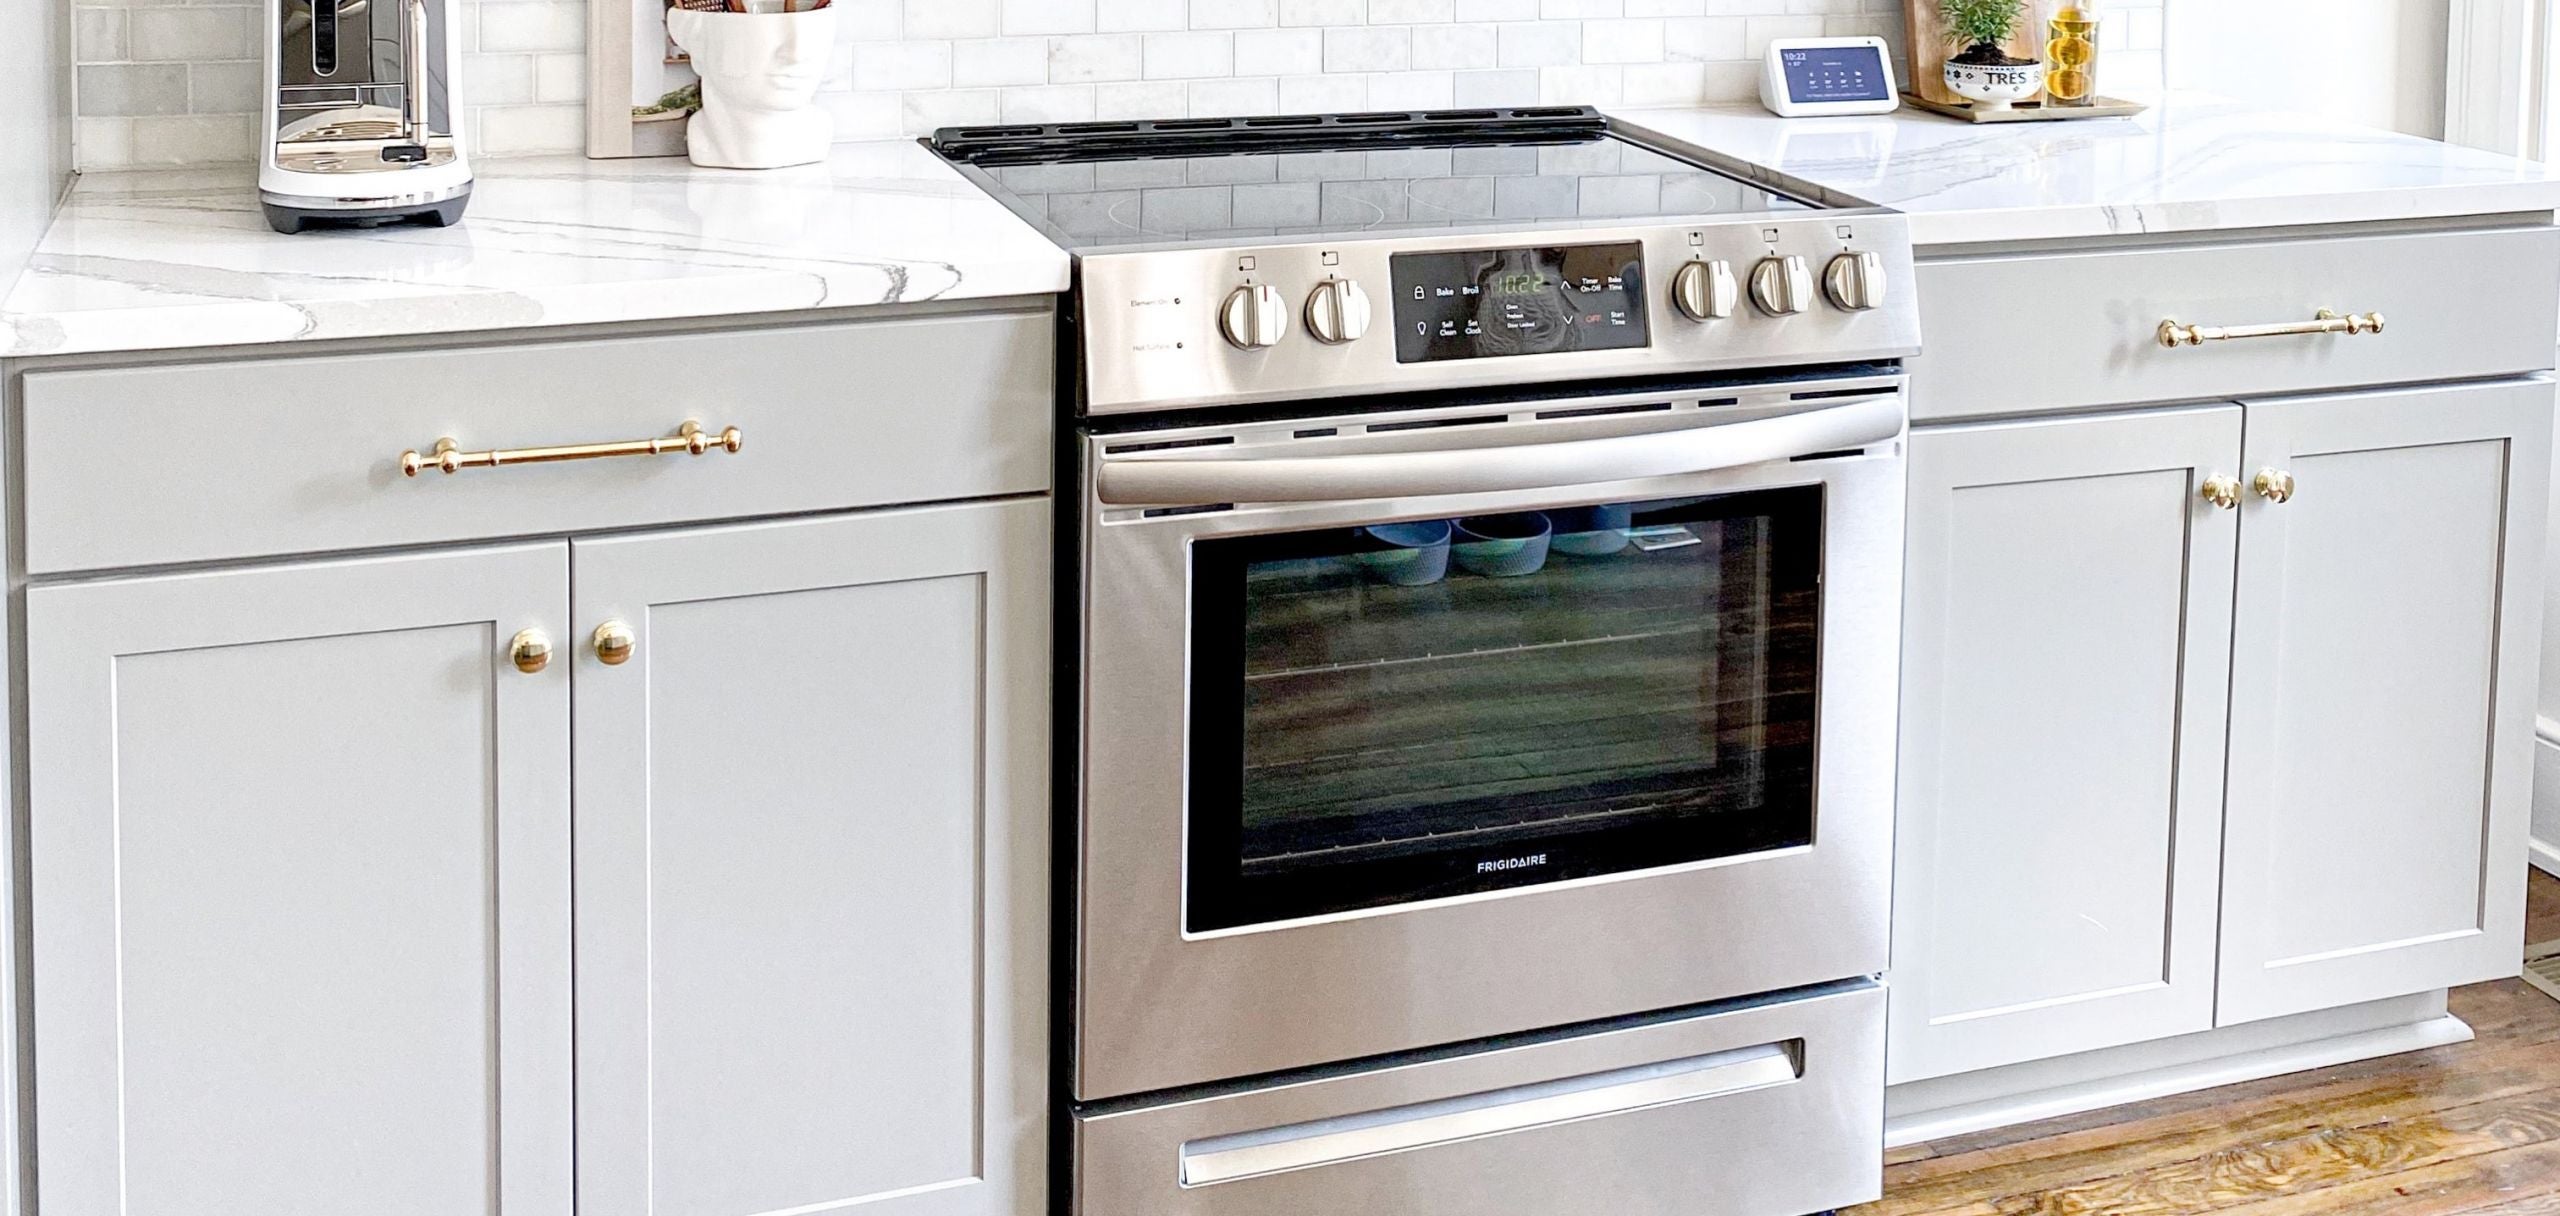 best ovens - freestanding oven in a kitchen